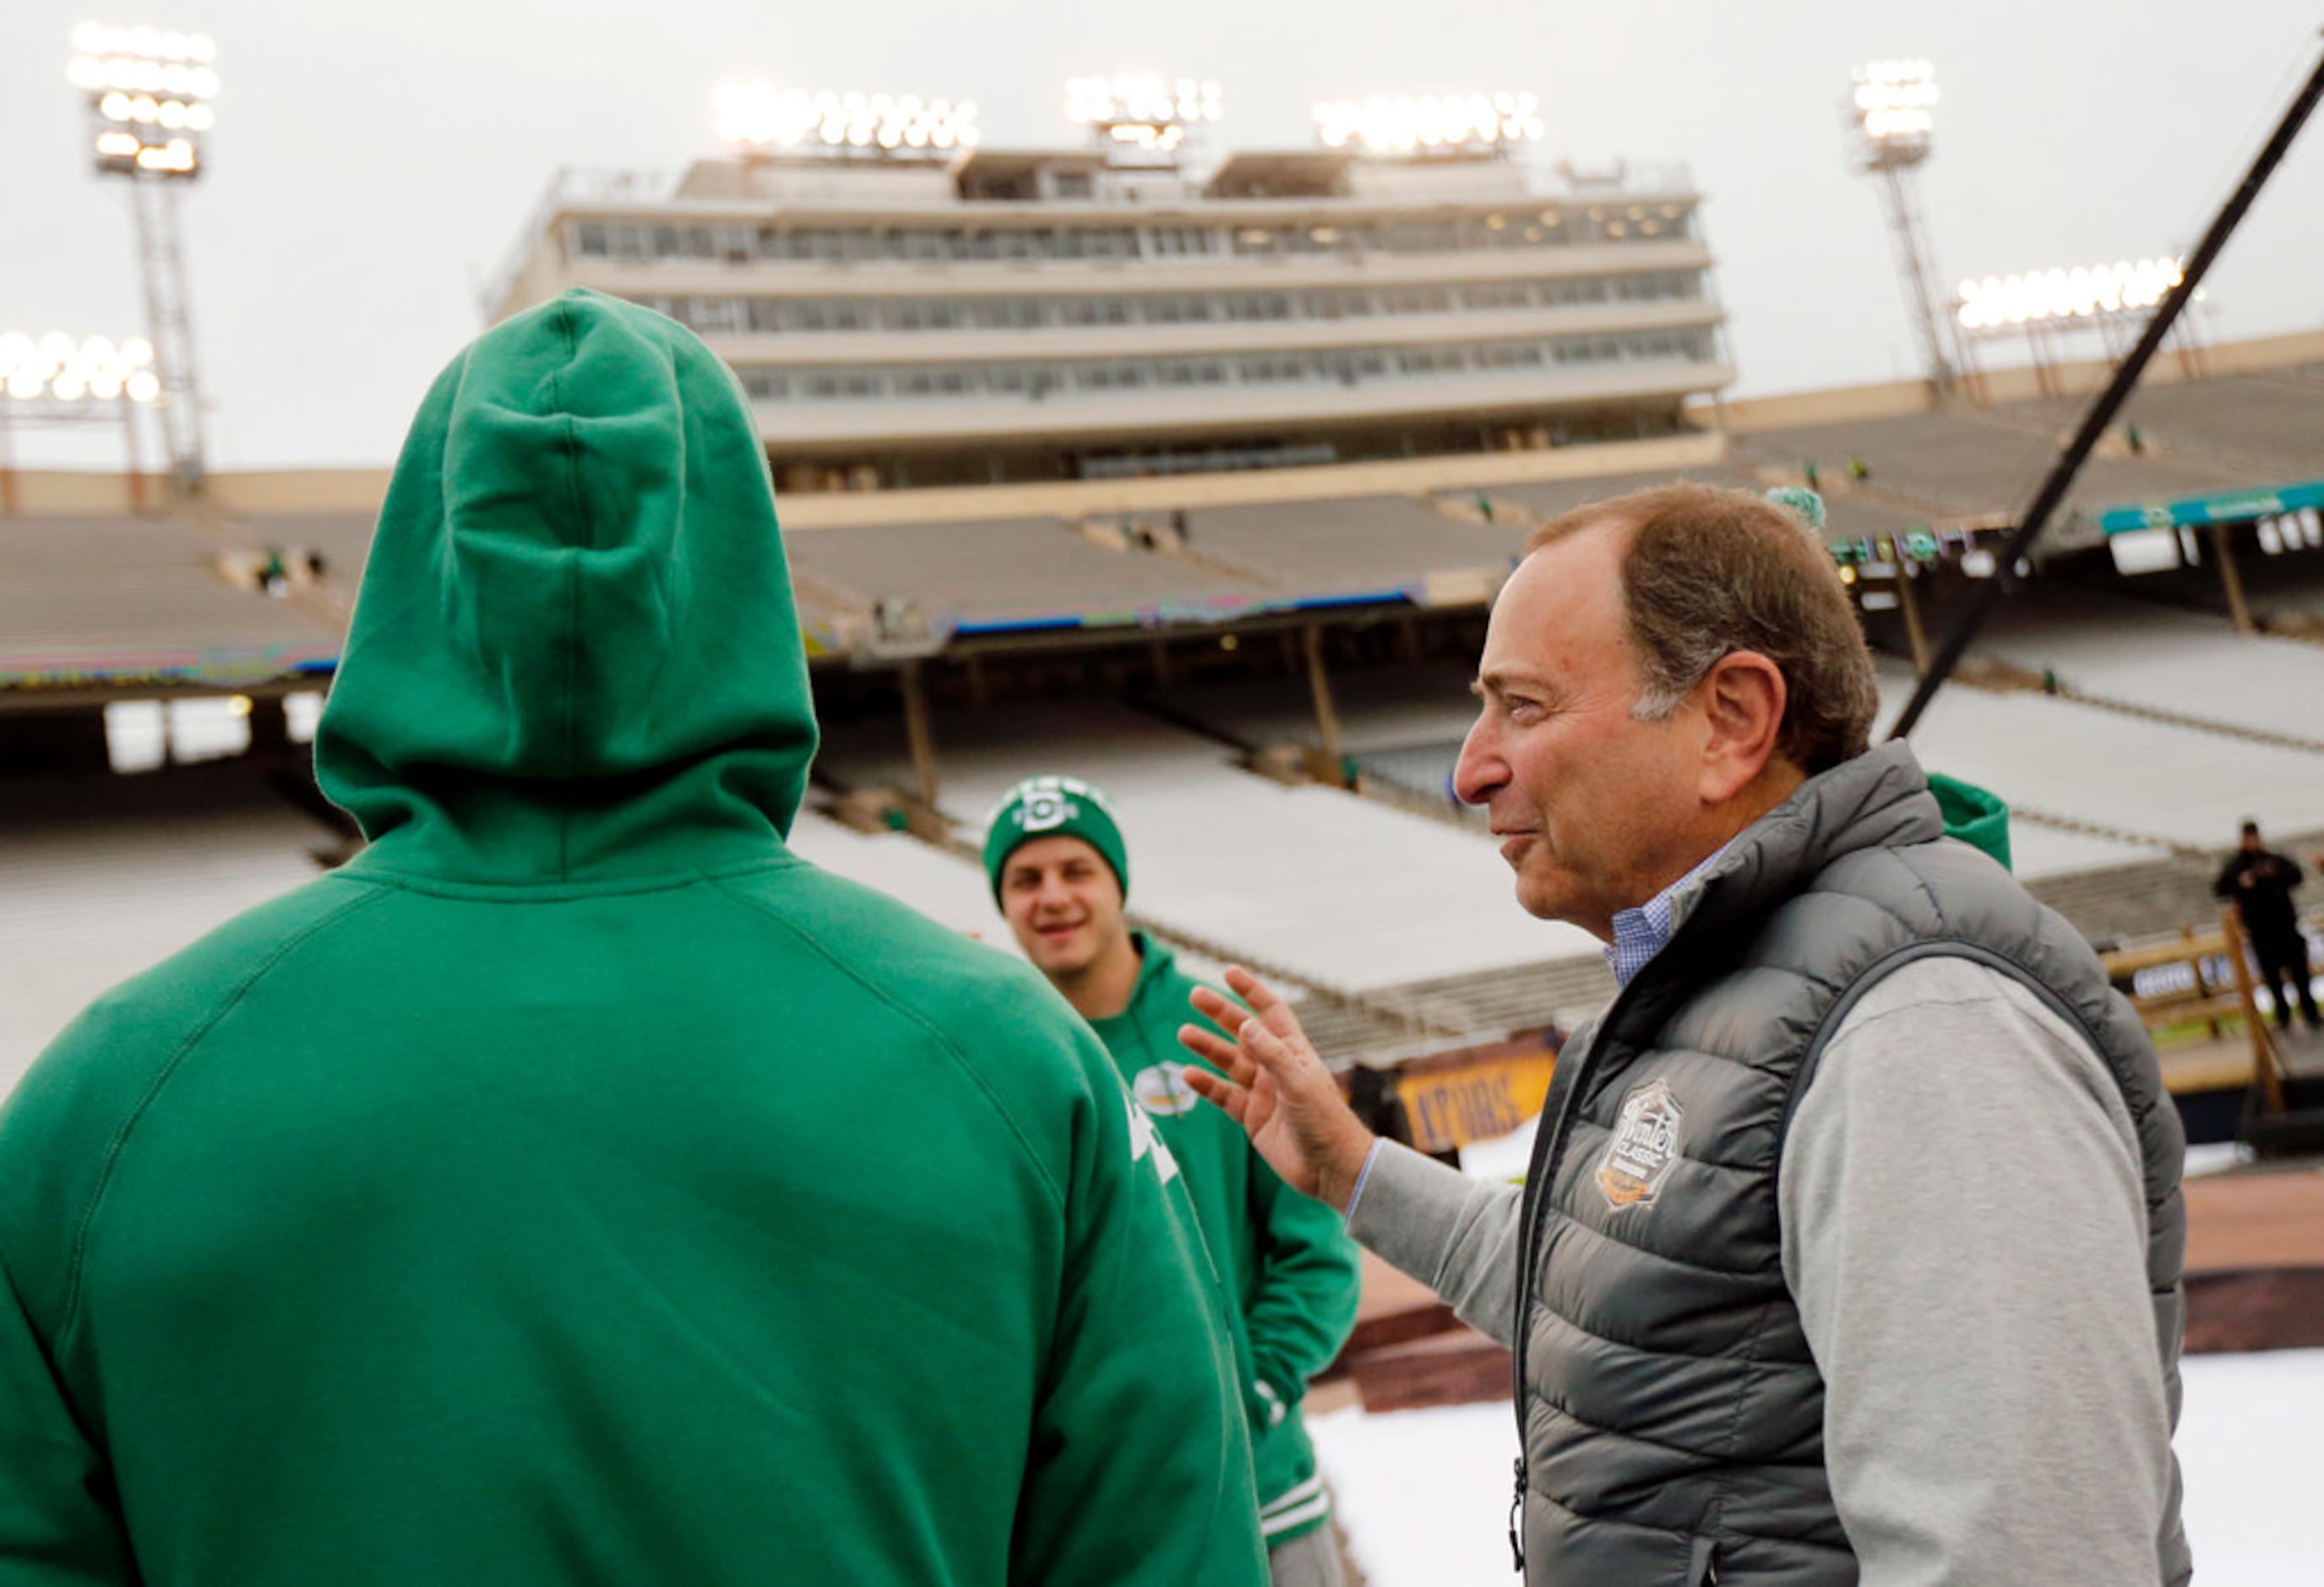 NHL Commissioner Gary Bettman (right) visits with Dallas Stars players prior to the outdoor...